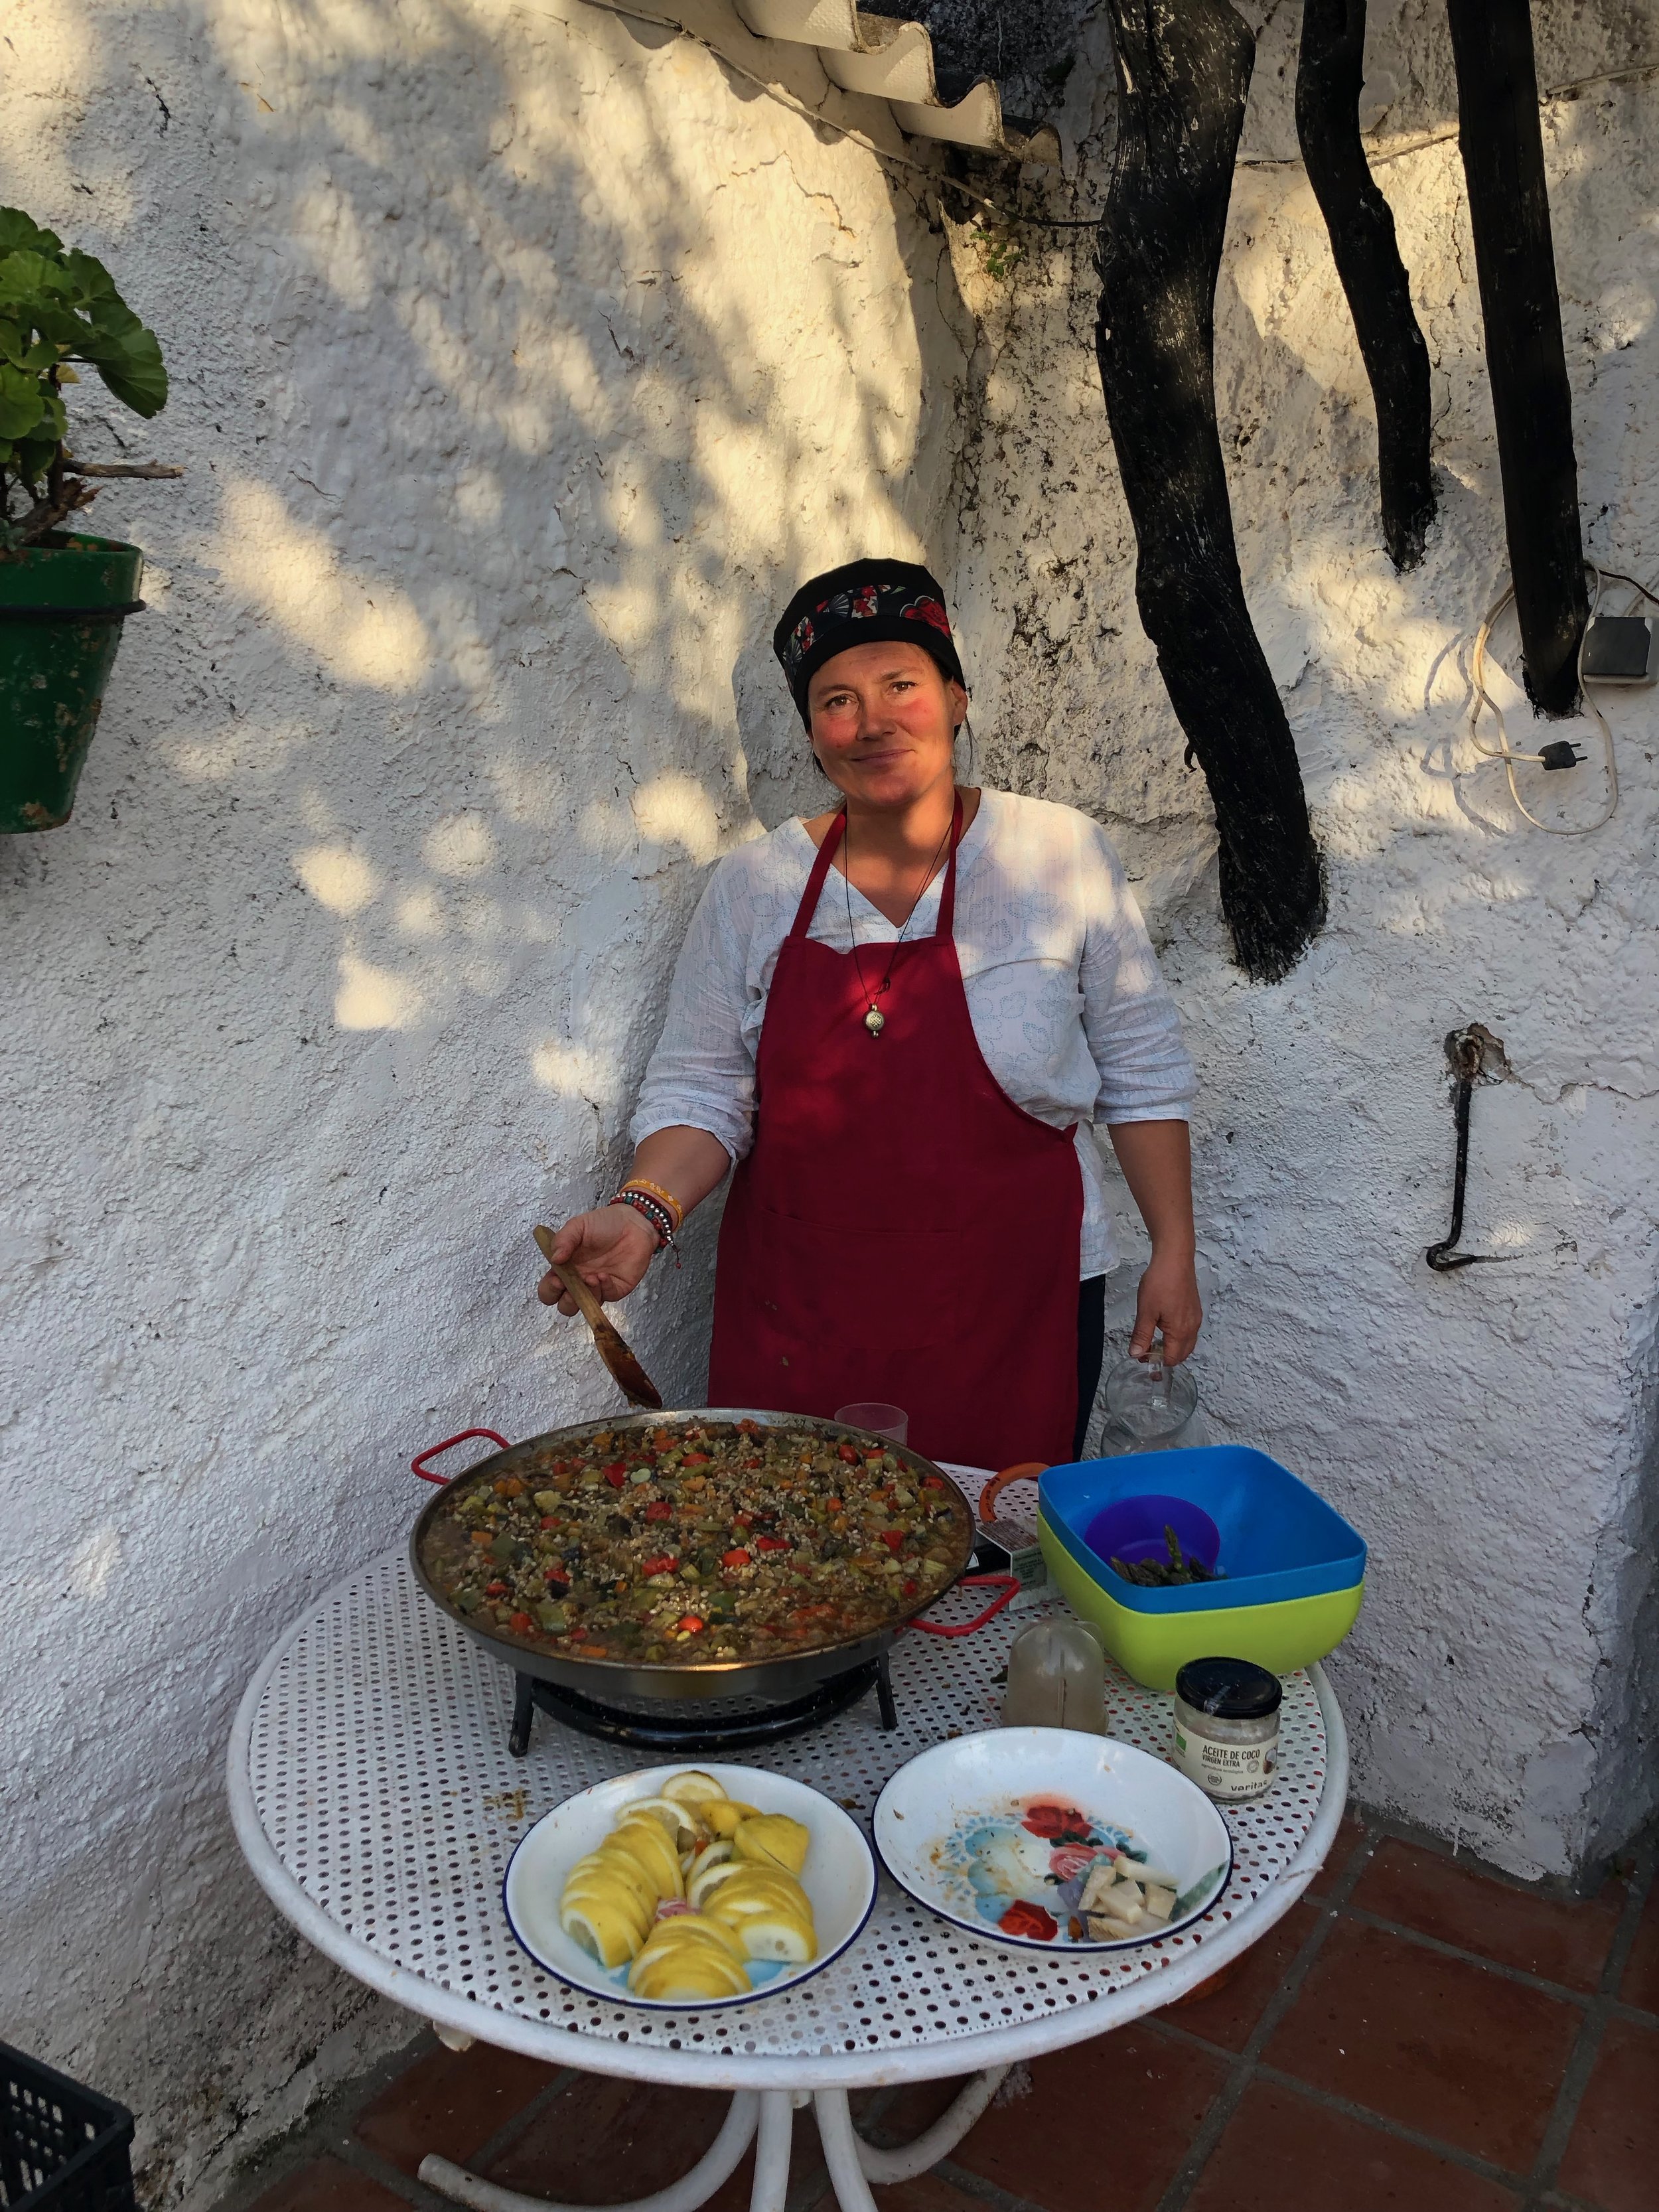 Tiziana with her vegan paella at Yin Yang Yoga retreat in the Malaga mountains in Spain with Jane Bakx Yoga (Copy)